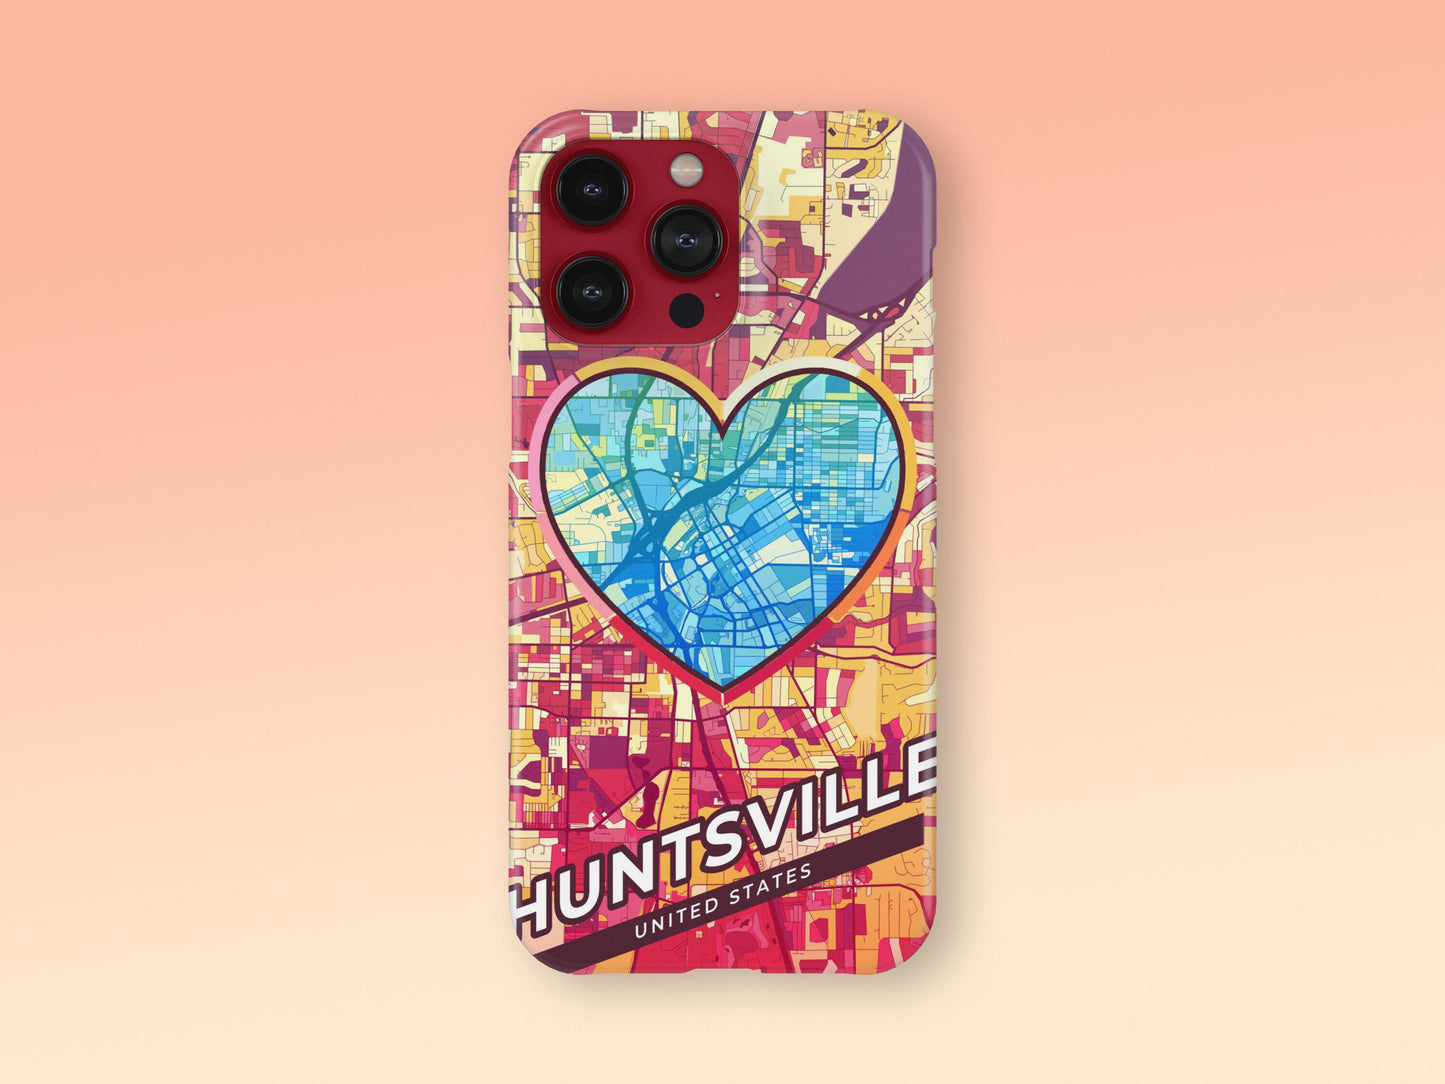 Huntsville Alabama slim phone case with colorful icon. Birthday, wedding or housewarming gift. Couple match cases. 2